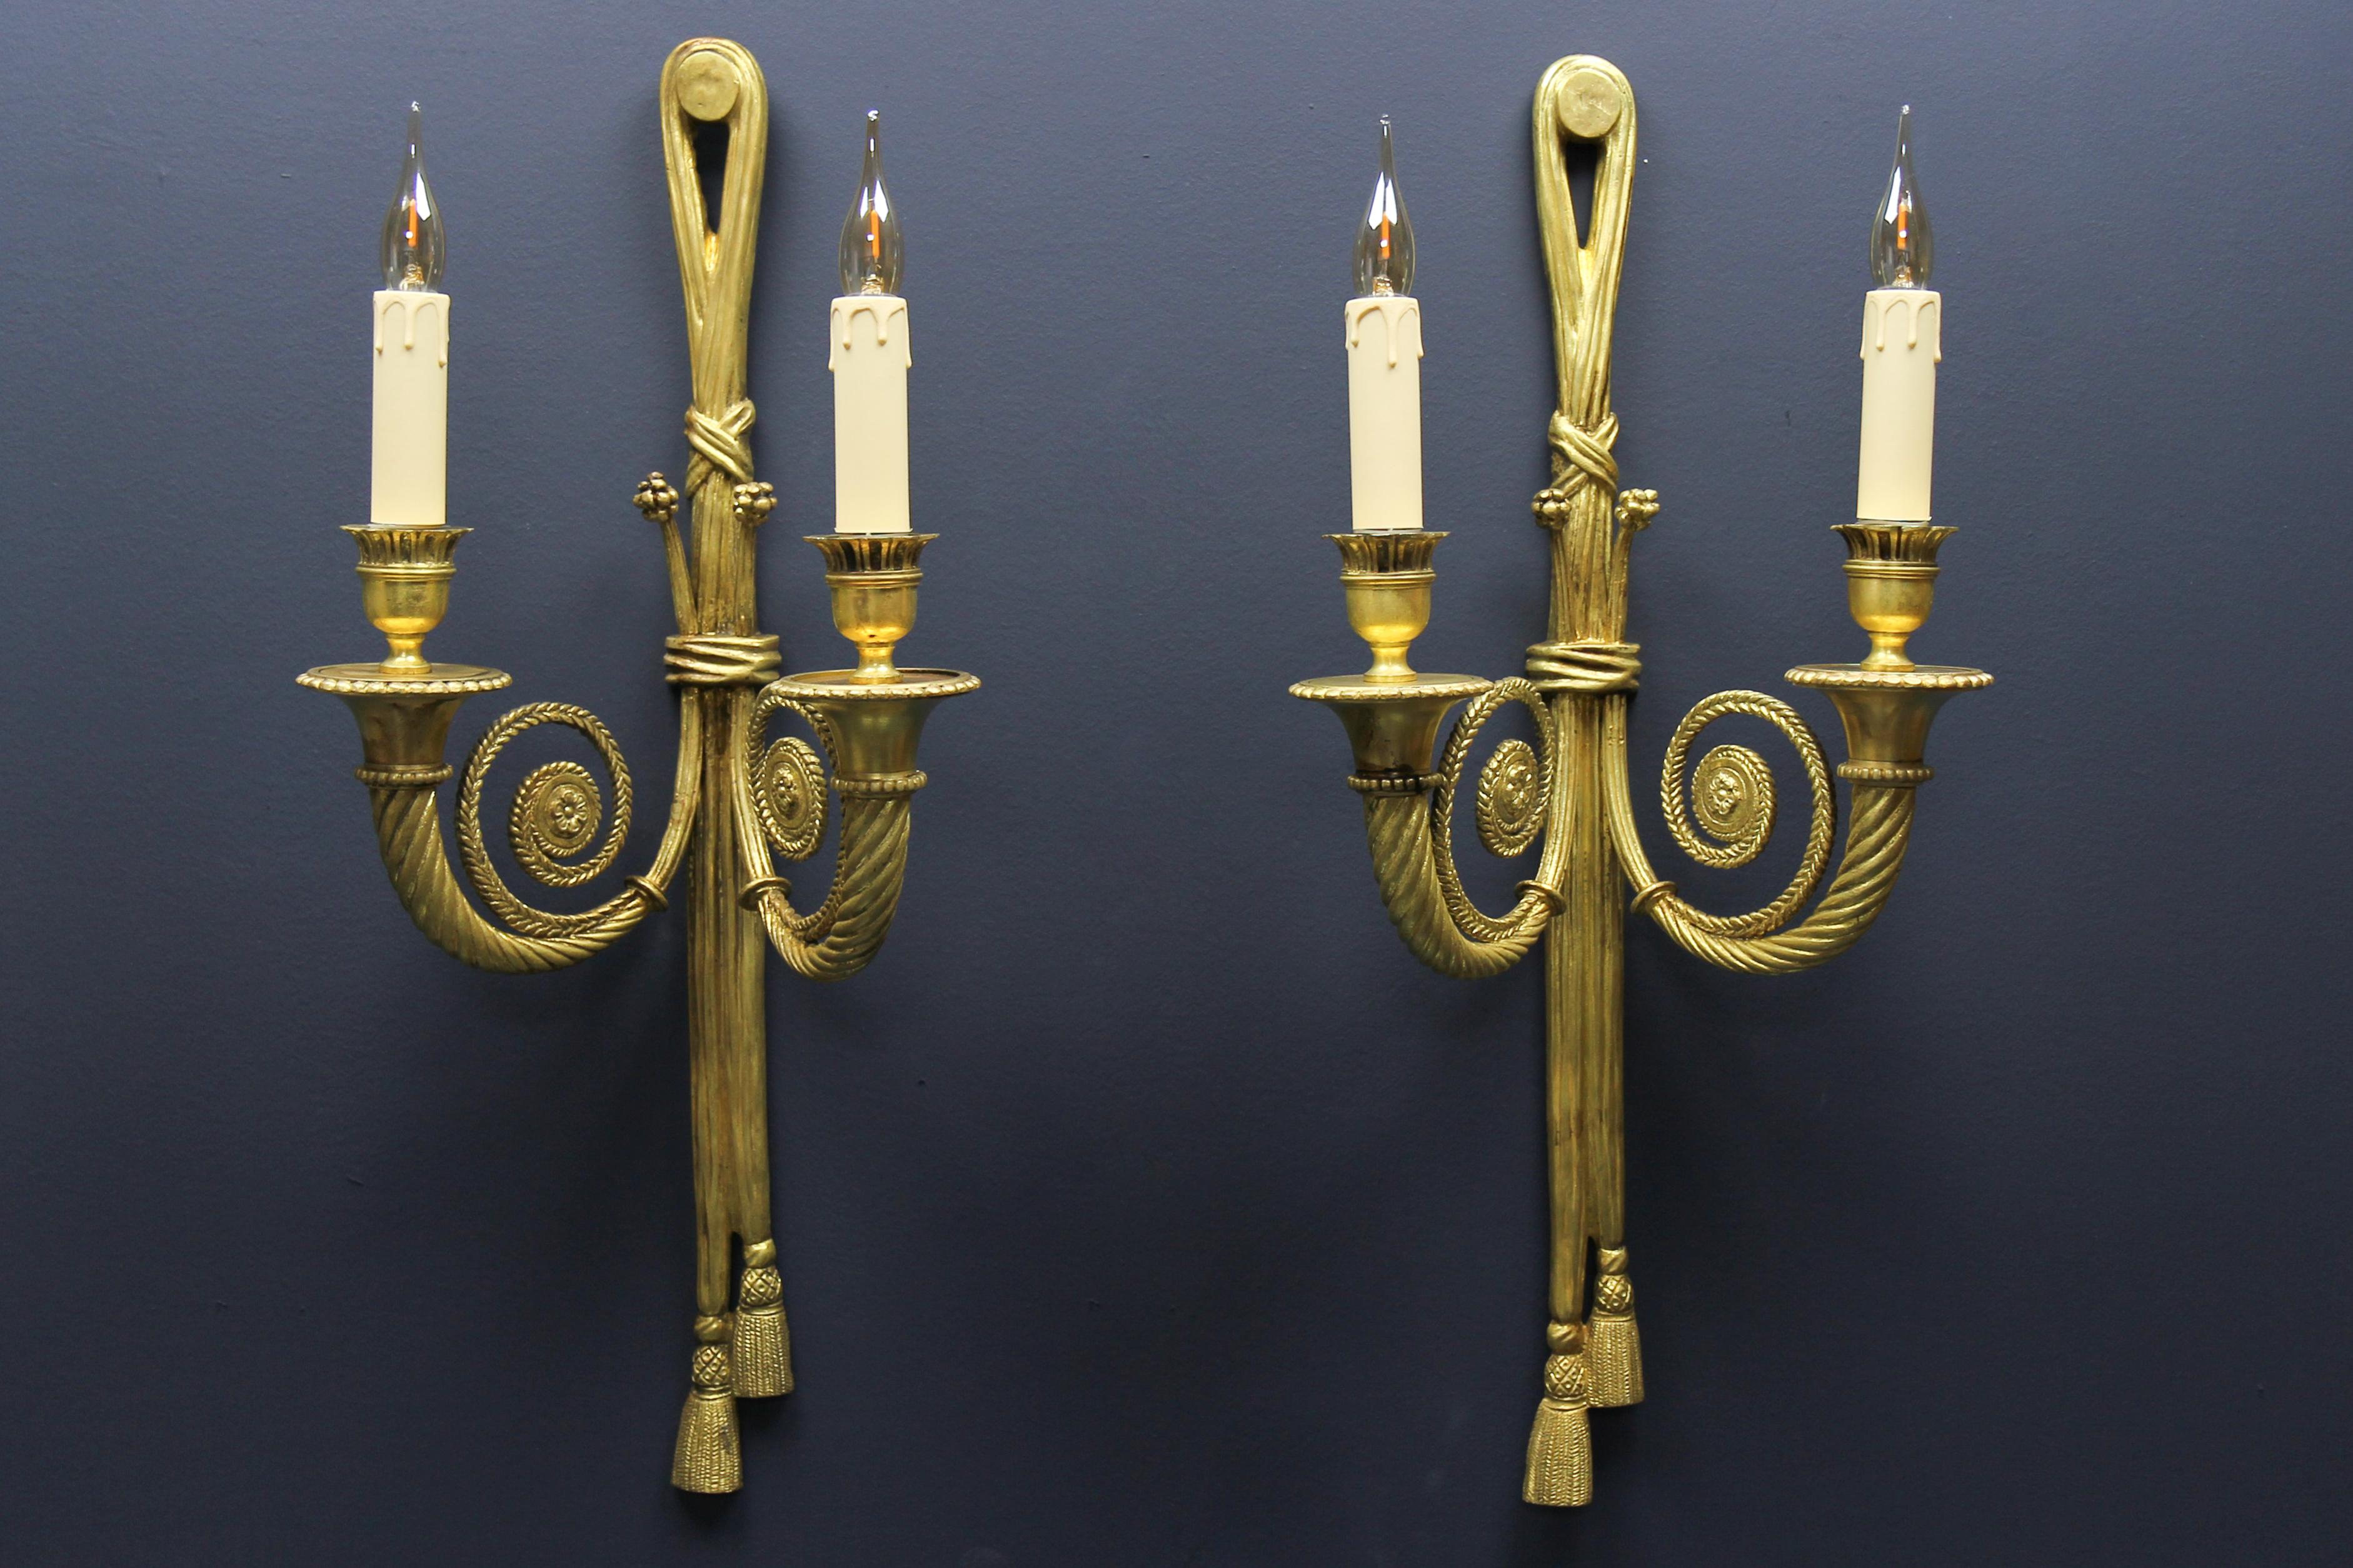 Pair of French Louis XVI style two-arm ribbon, knot, and tassel sconces, ca. 1910.
An elegant and large set of two Louis XVI or Neoclassical style bronze double-arm sconces from early 20th century, France. These impressive and beautiful sconces are